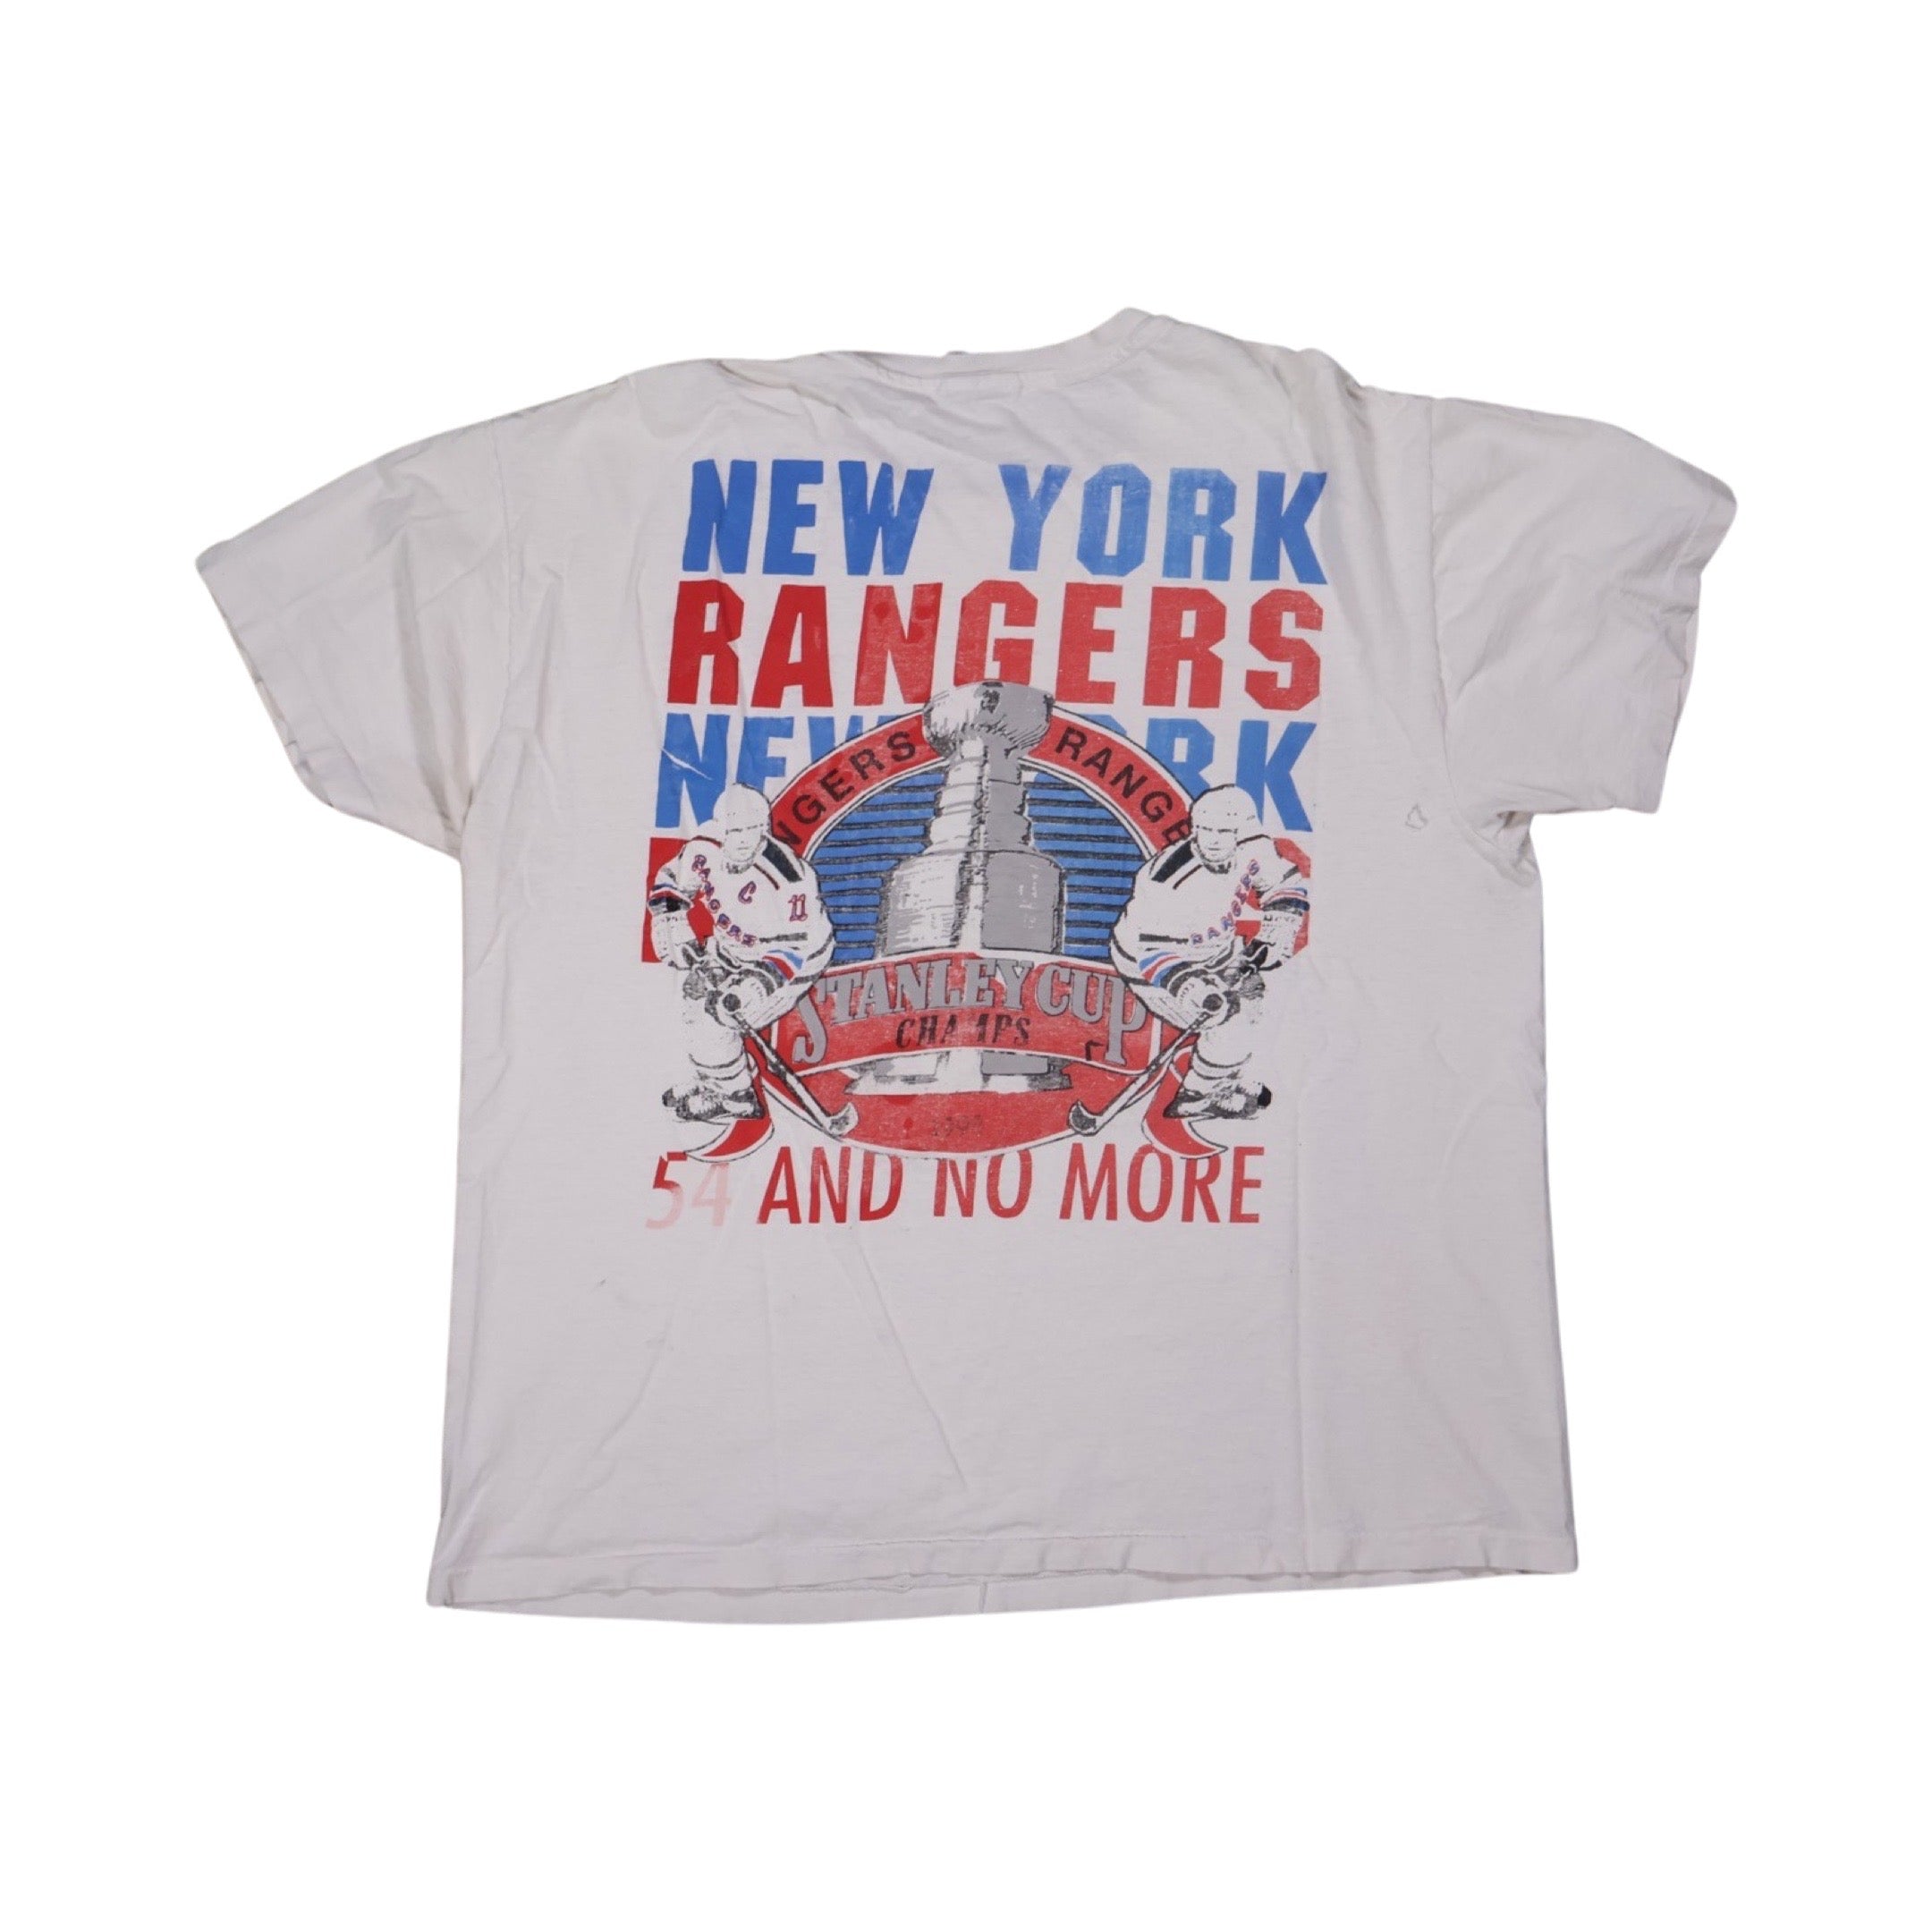 New York Rangers 1994 Stanley Cup Champs T-Shirt (Large)